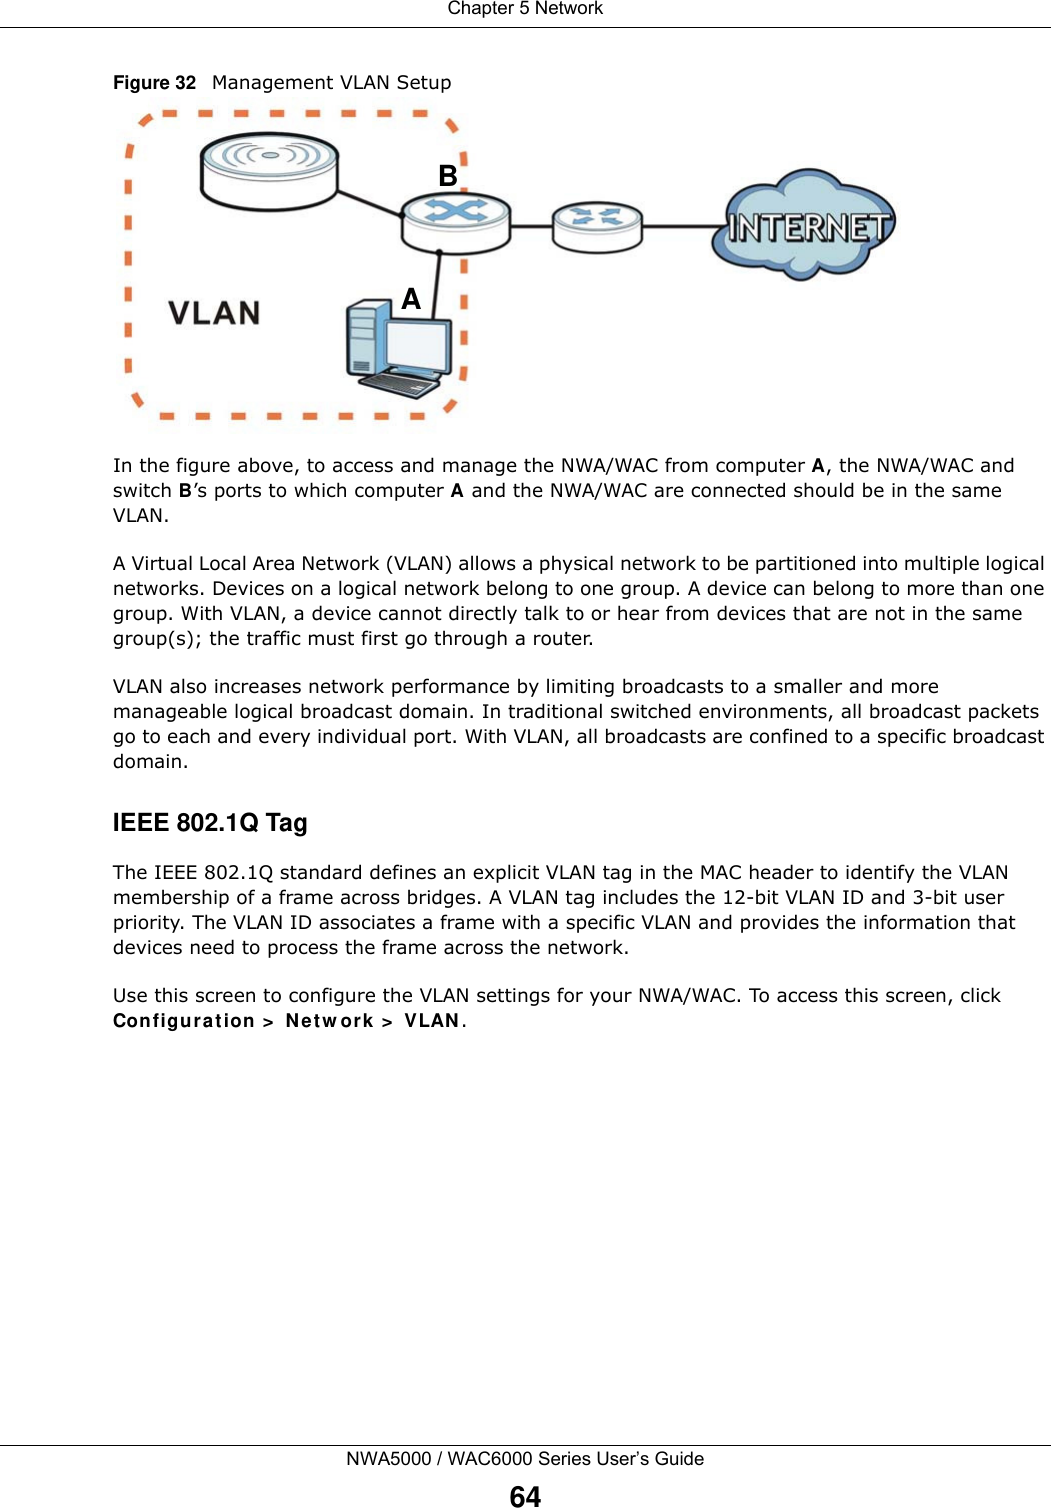 Chapter 5 NetworkNWA5000 / WAC6000 Series User’s Guide64Figure 32   Management VLAN SetupIn the figure above, to access and manage the NWA/WAC from computer A, the NWA/WAC and switch B’s ports to which computer A and the NWA/WAC are connected should be in the same VLAN.A Virtual Local Area Network (VLAN) allows a physical network to be partitioned into multiple logical networks. Devices on a logical network belong to one group. A device can belong to more than one group. With VLAN, a device cannot directly talk to or hear from devices that are not in the same group(s); the traffic must first go through a router.VLAN also increases network performance by limiting broadcasts to a smaller and more manageable logical broadcast domain. In traditional switched environments, all broadcast packets go to each and every individual port. With VLAN, all broadcasts are confined to a specific broadcast domain. IEEE 802.1Q TagThe IEEE 802.1Q standard defines an explicit VLAN tag in the MAC header to identify the VLAN membership of a frame across bridges. A VLAN tag includes the 12-bit VLAN ID and 3-bit user priority. The VLAN ID associates a frame with a specific VLAN and provides the information that devices need to process the frame across the network. Use this screen to configure the VLAN settings for your NWA/WAC. To access this screen, click Configuration &gt; Network &gt; VLAN.AB